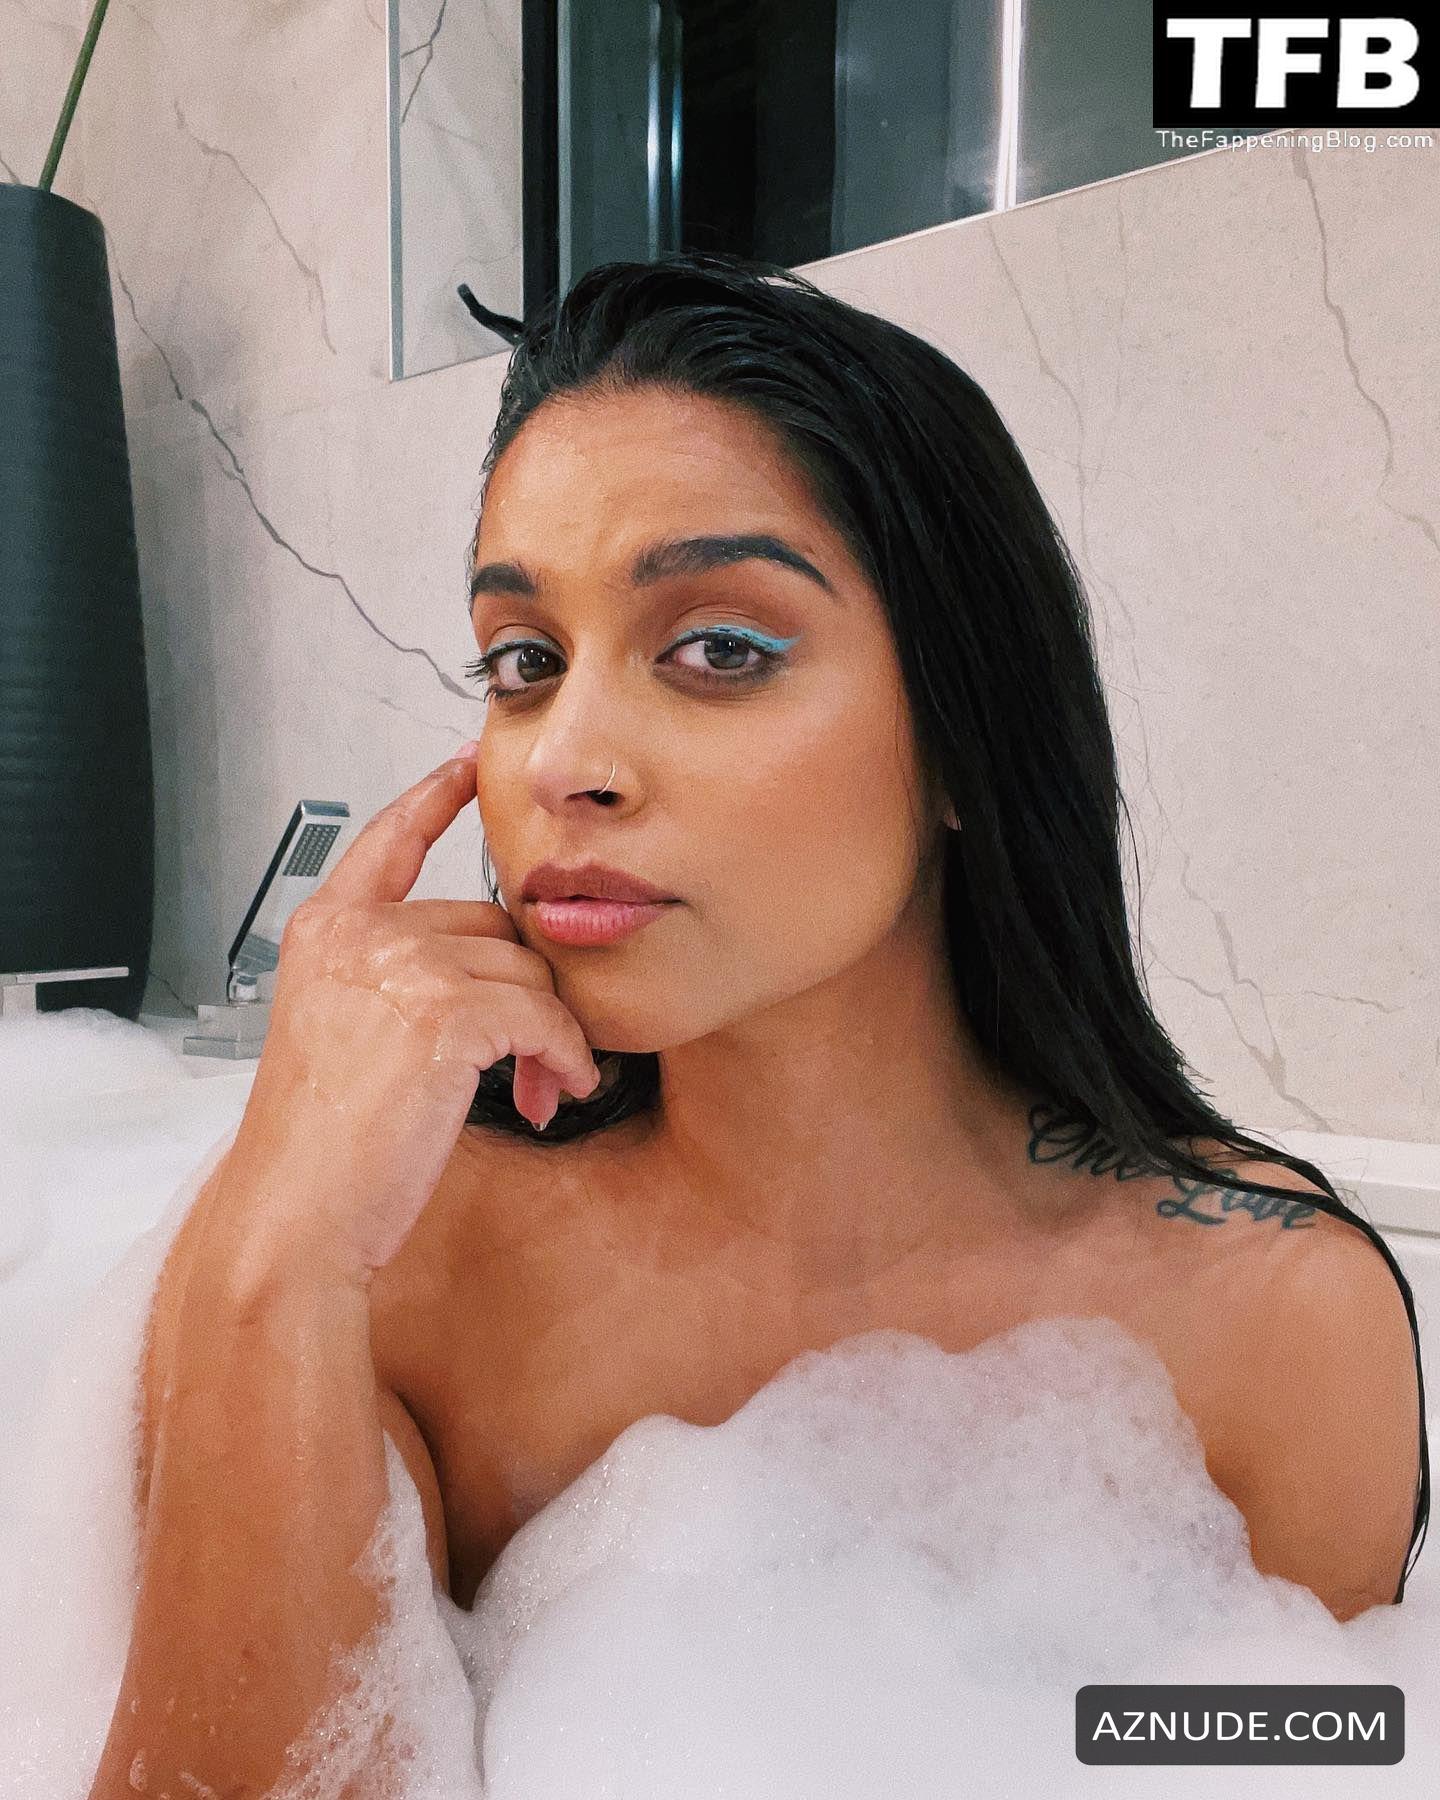 LILLY SINGH Nude pic